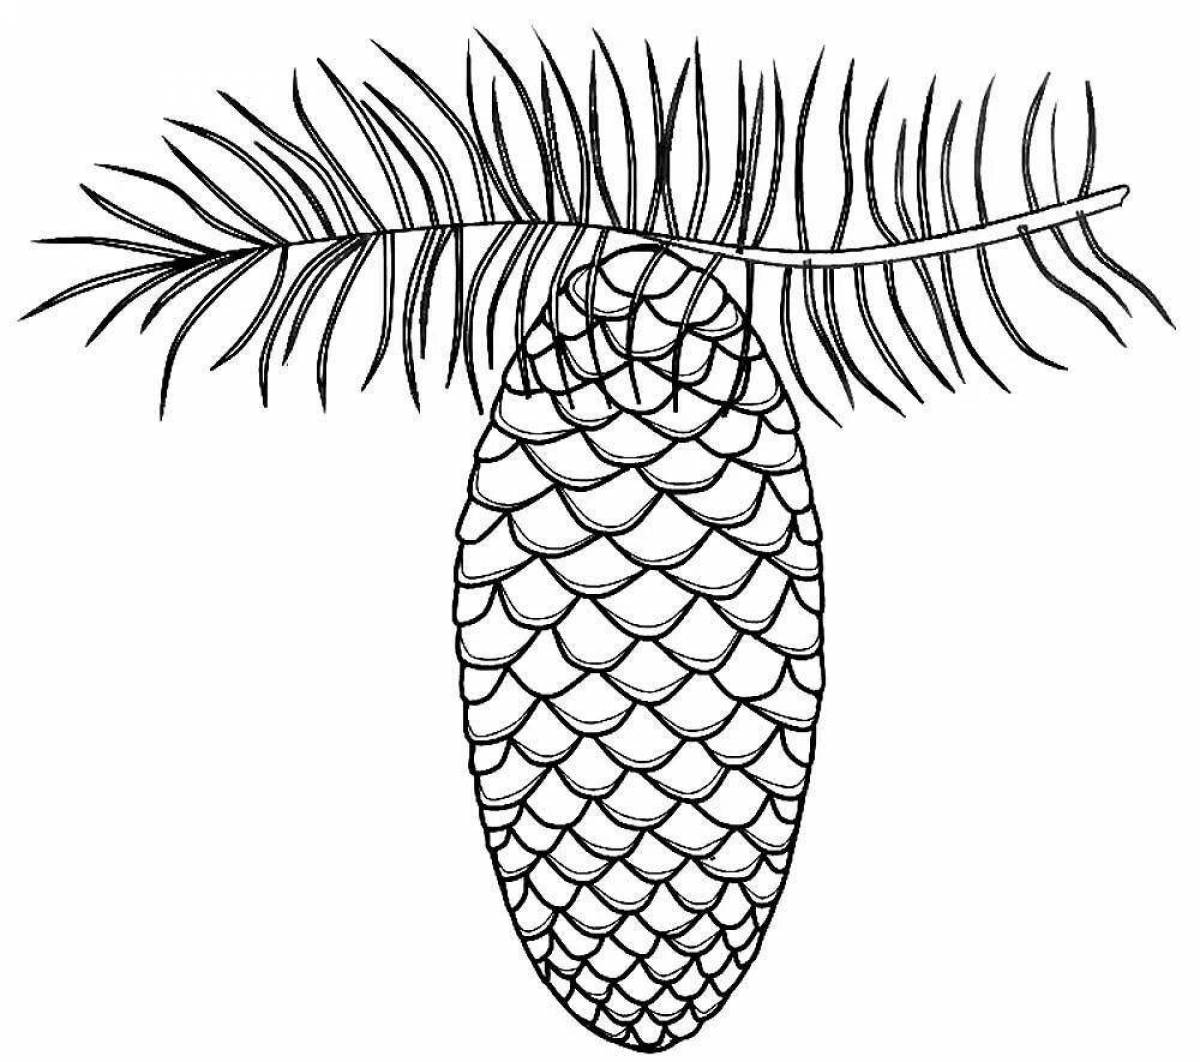 Spikes radiant coloring page